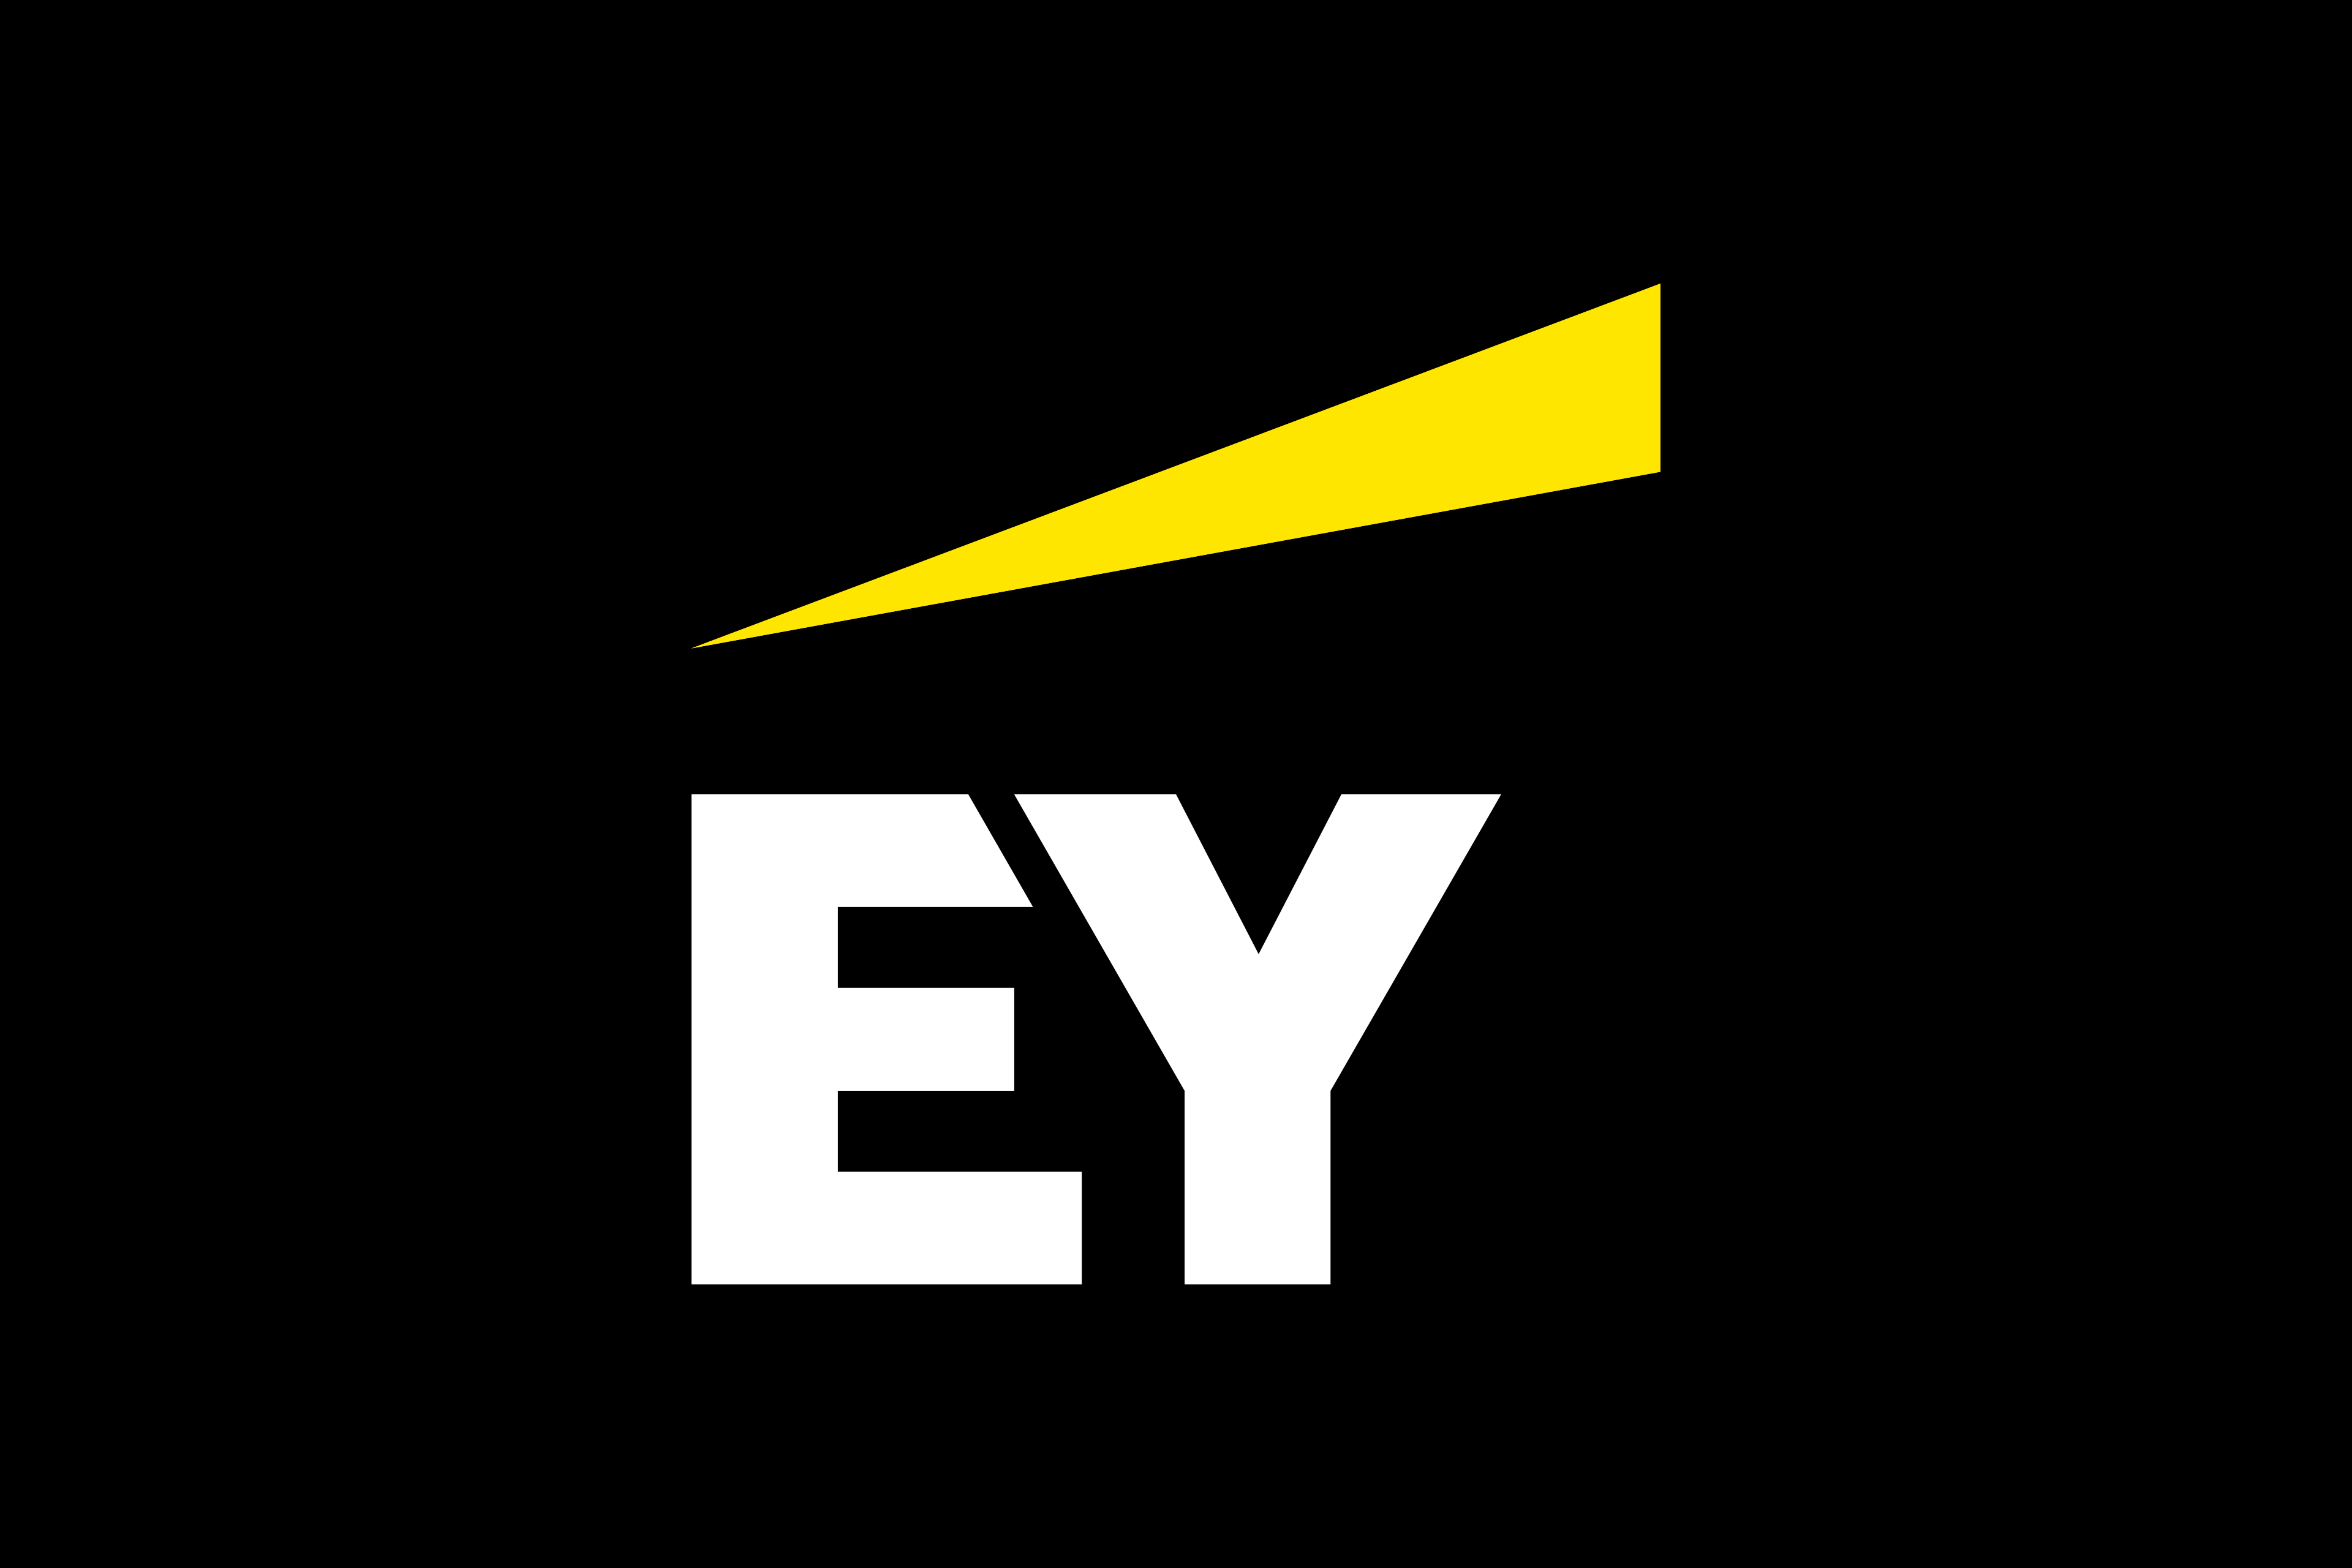 Ernst & Young is a multinational professional services partnership with its headquarters in London, England. It is one of the world's largest professional services networks